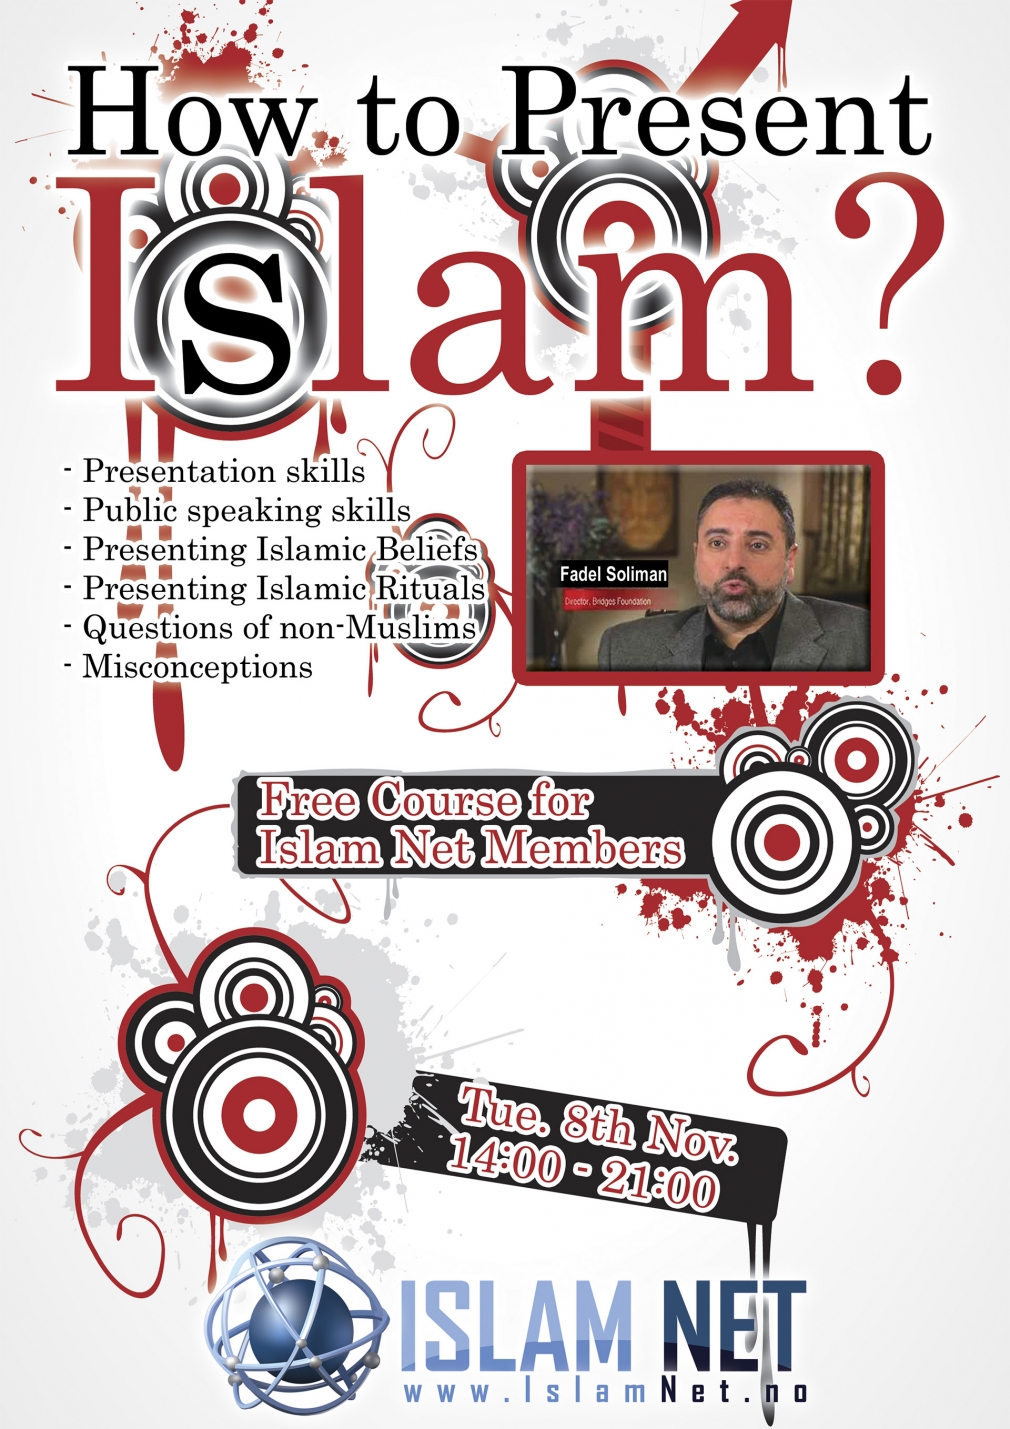 How to Present Islam - Fadel Soliman